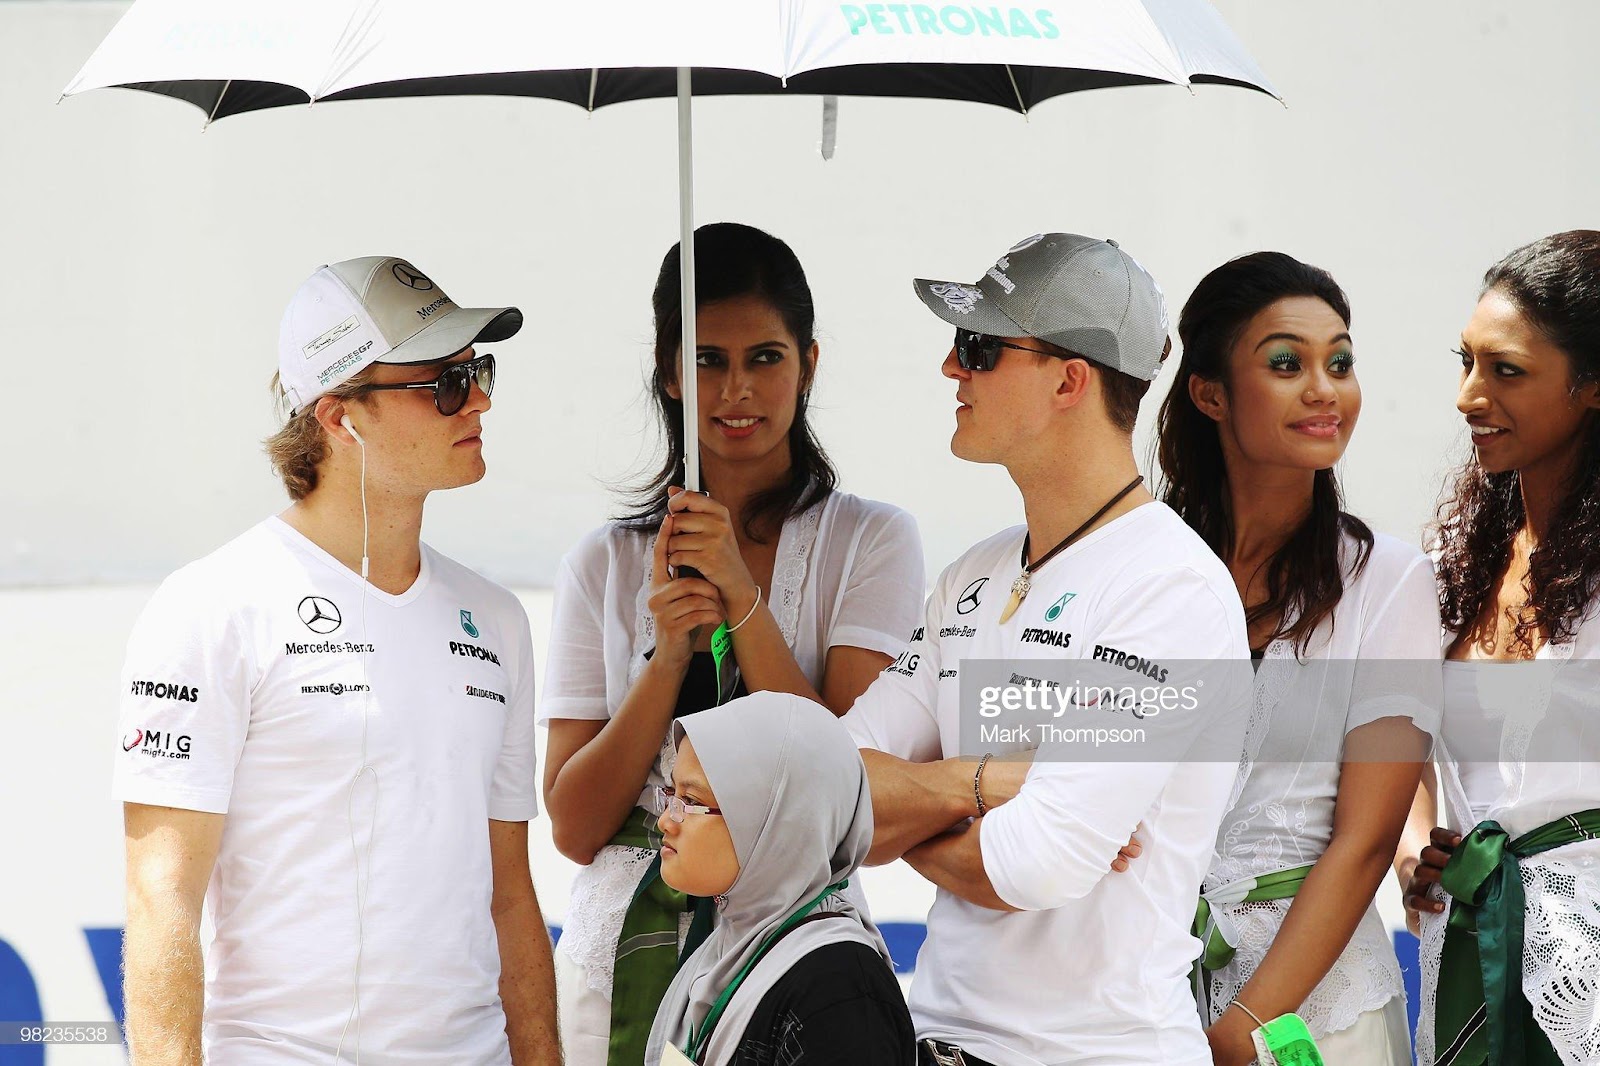 Nico Rosberg (left), Mercedes GP, team mate Michael Schumacher (right), Mercedes GP, attend the drivers parade before the Malaysian F1 Grand Prix at the Sepang Circuit on April 4, 2010 in Kuala Lumpur.